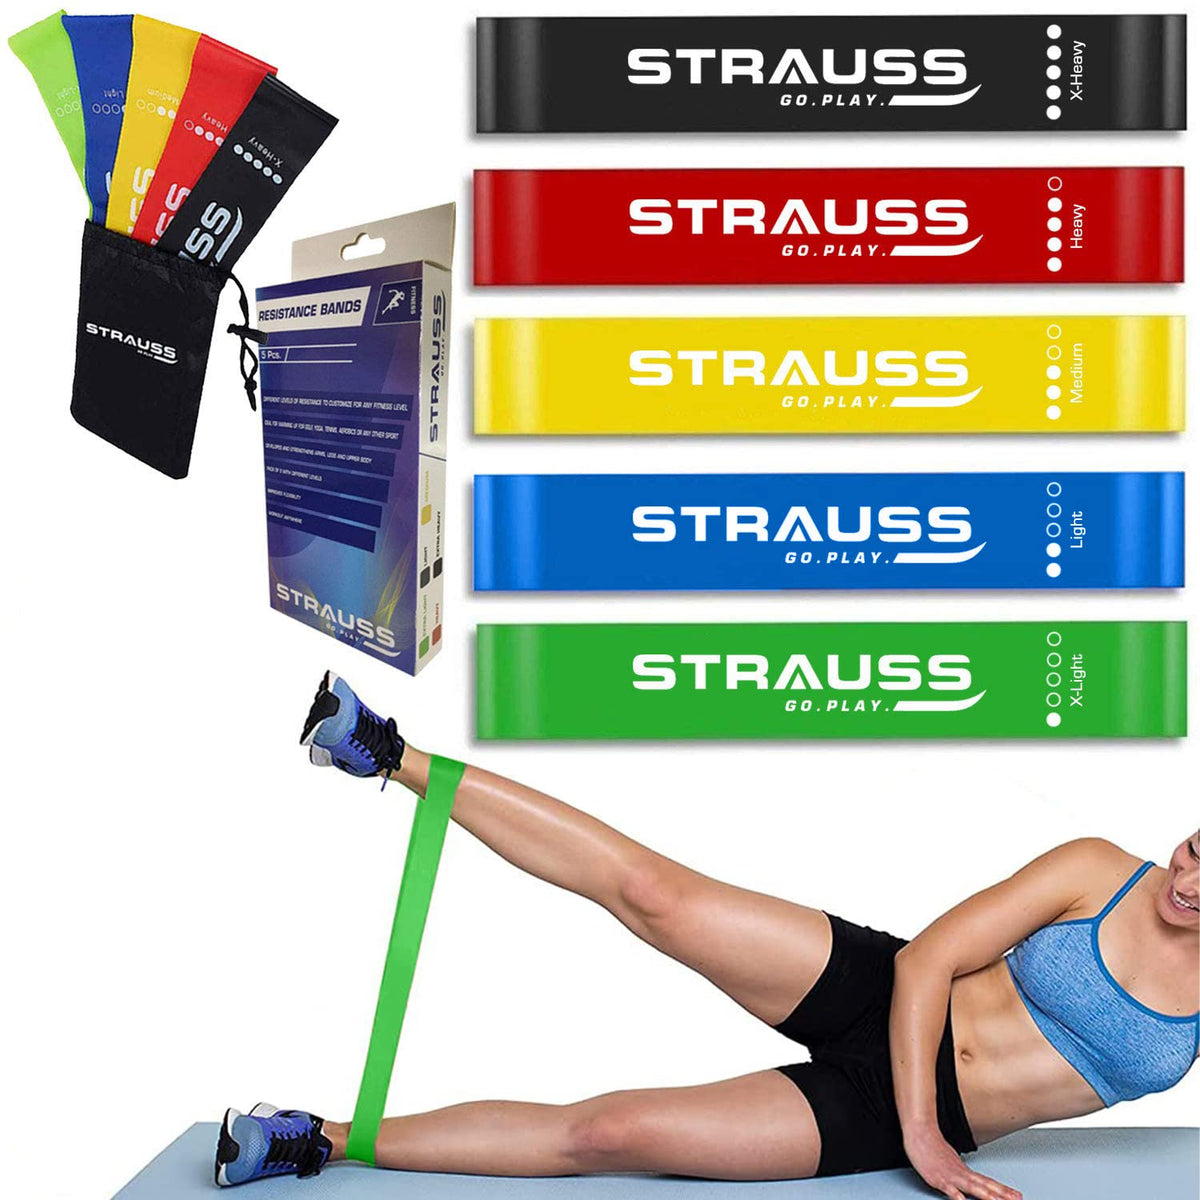 Strauss Natural Latex Resistance Loop Bands | Smell-Free & Skin Friendly | Useful for Hips, Arms & Legs Workouts. Tear Resistant & Anti-Slip | Theraband for Fitness & Toning.